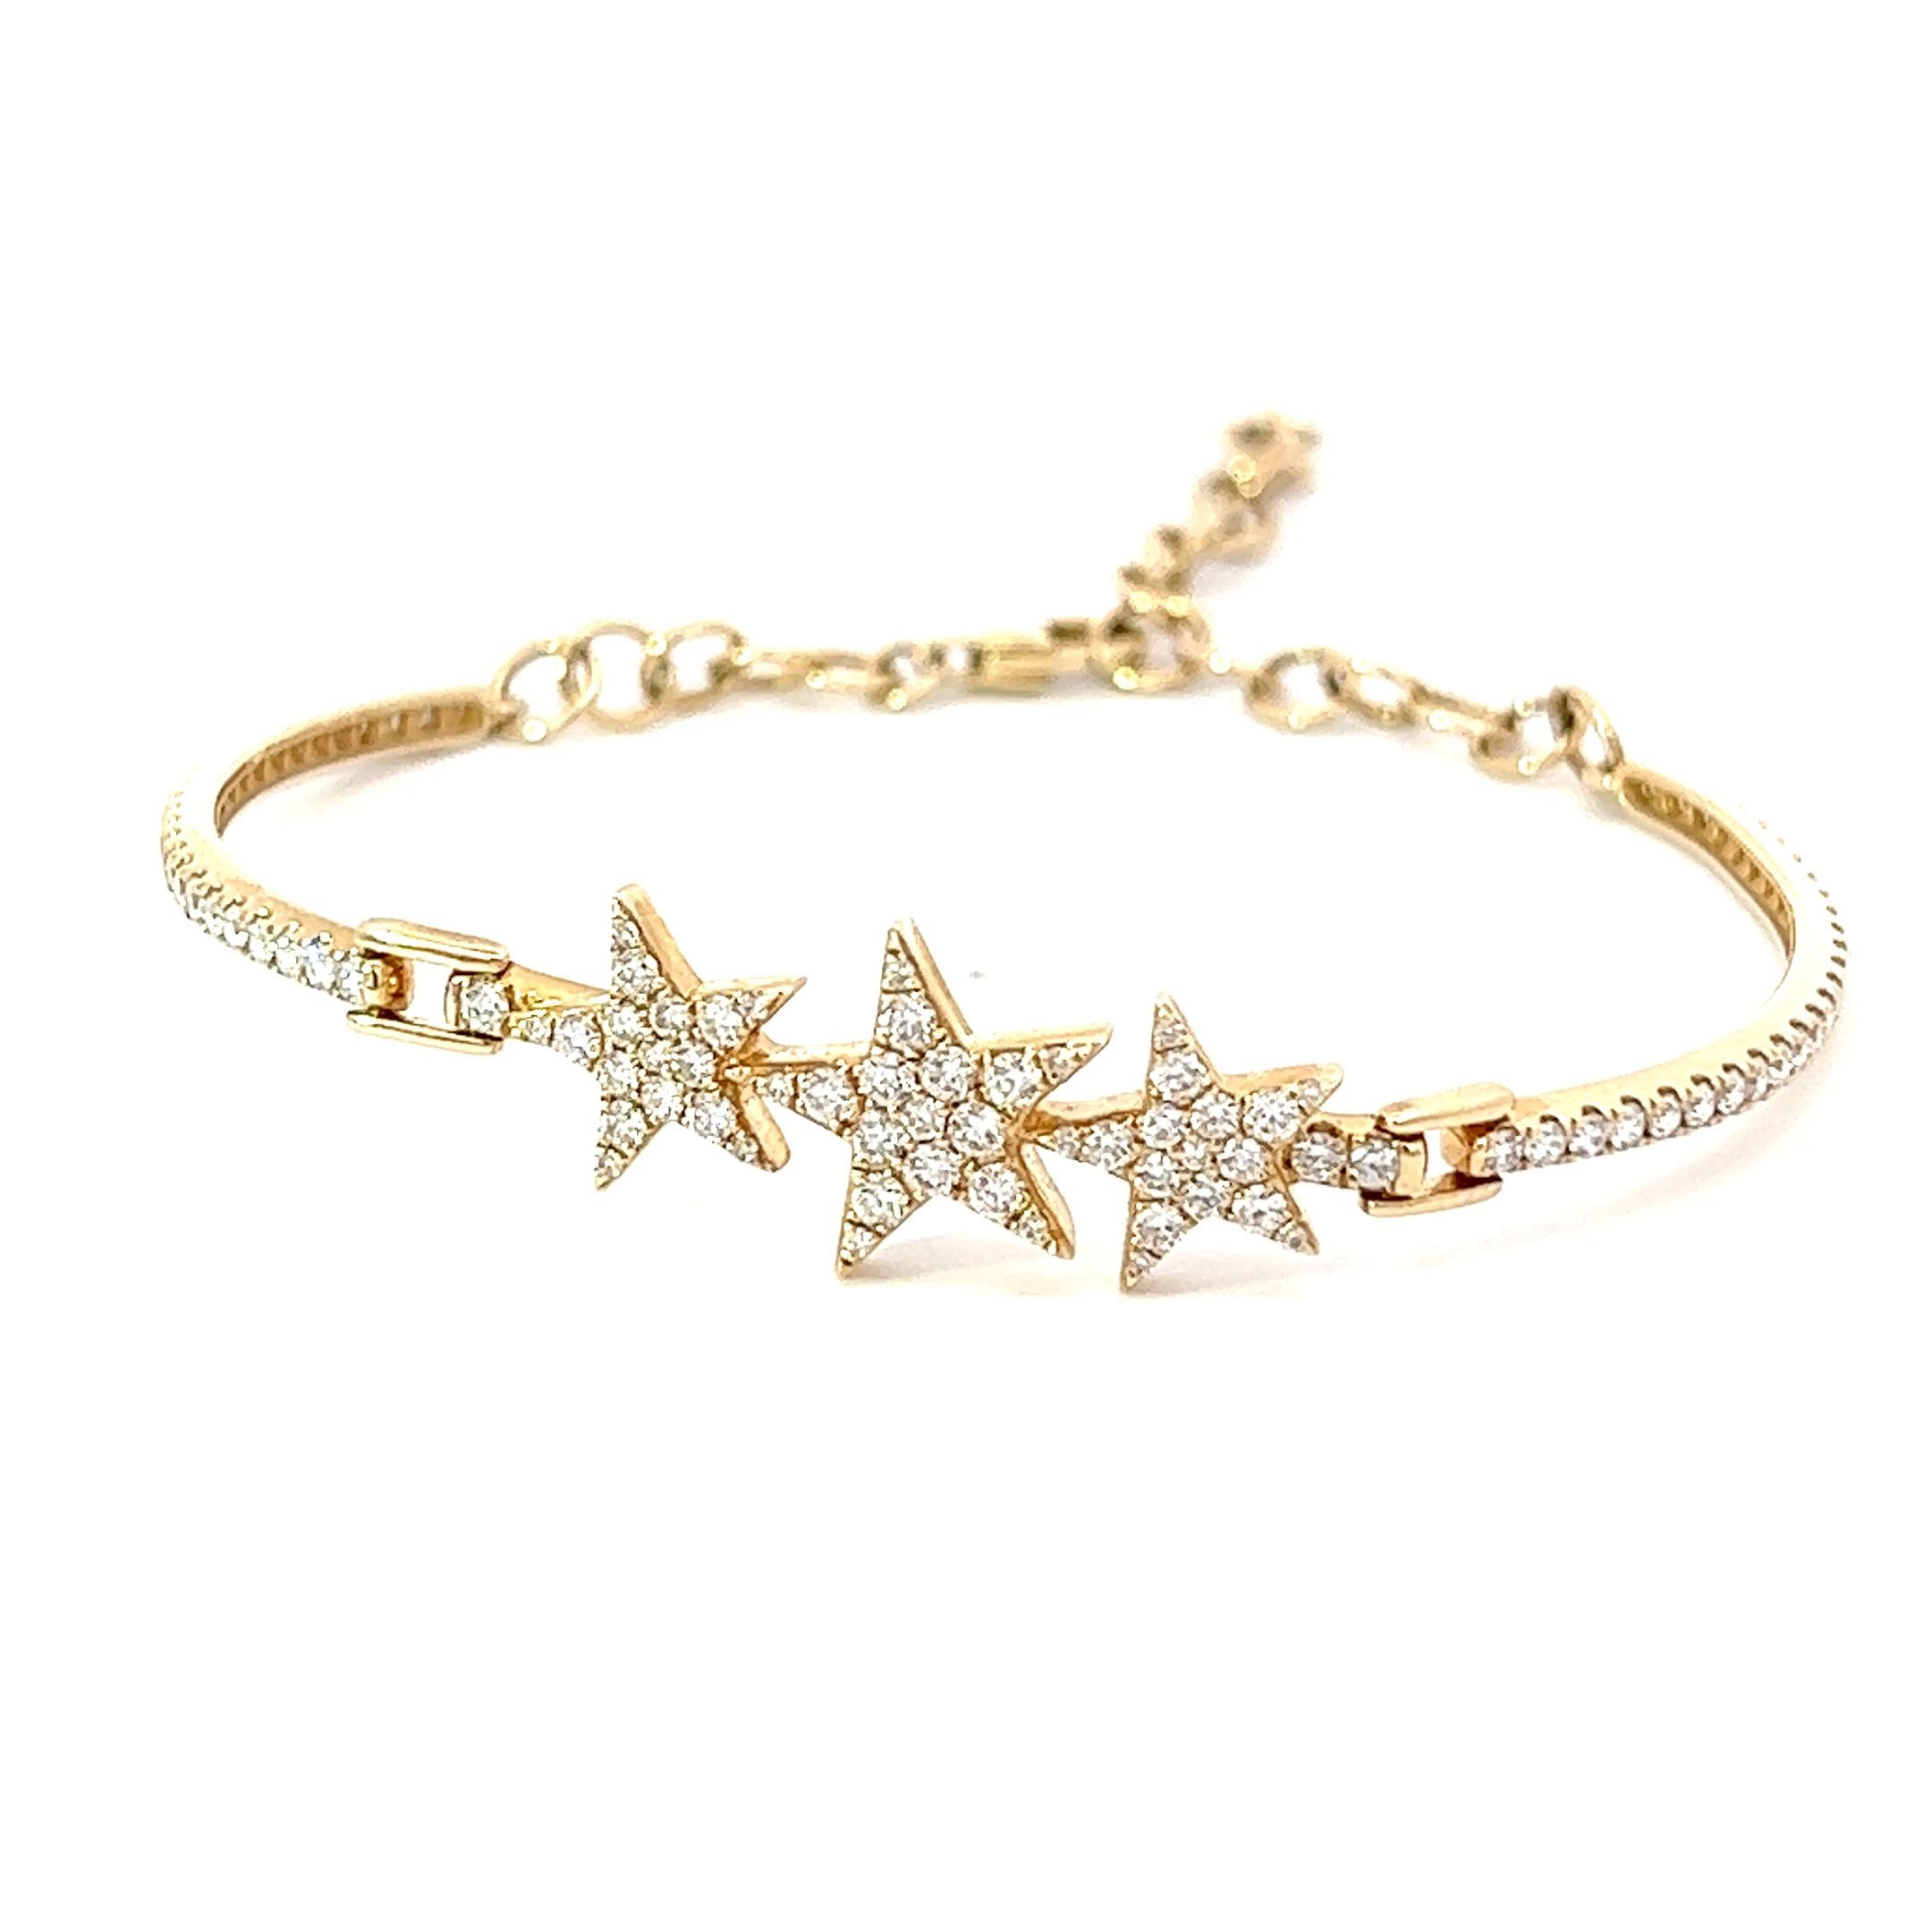  This 14k features  1.23CT Roung diamonds and an adjustable chain perfect for women and young girls. It's ideal for daily wear and can be easily paired with other jewelry.  Gold Bracelet f

-Metal Type: 14K Yellow Gold
-Gemstone: Diamonds, 1.23